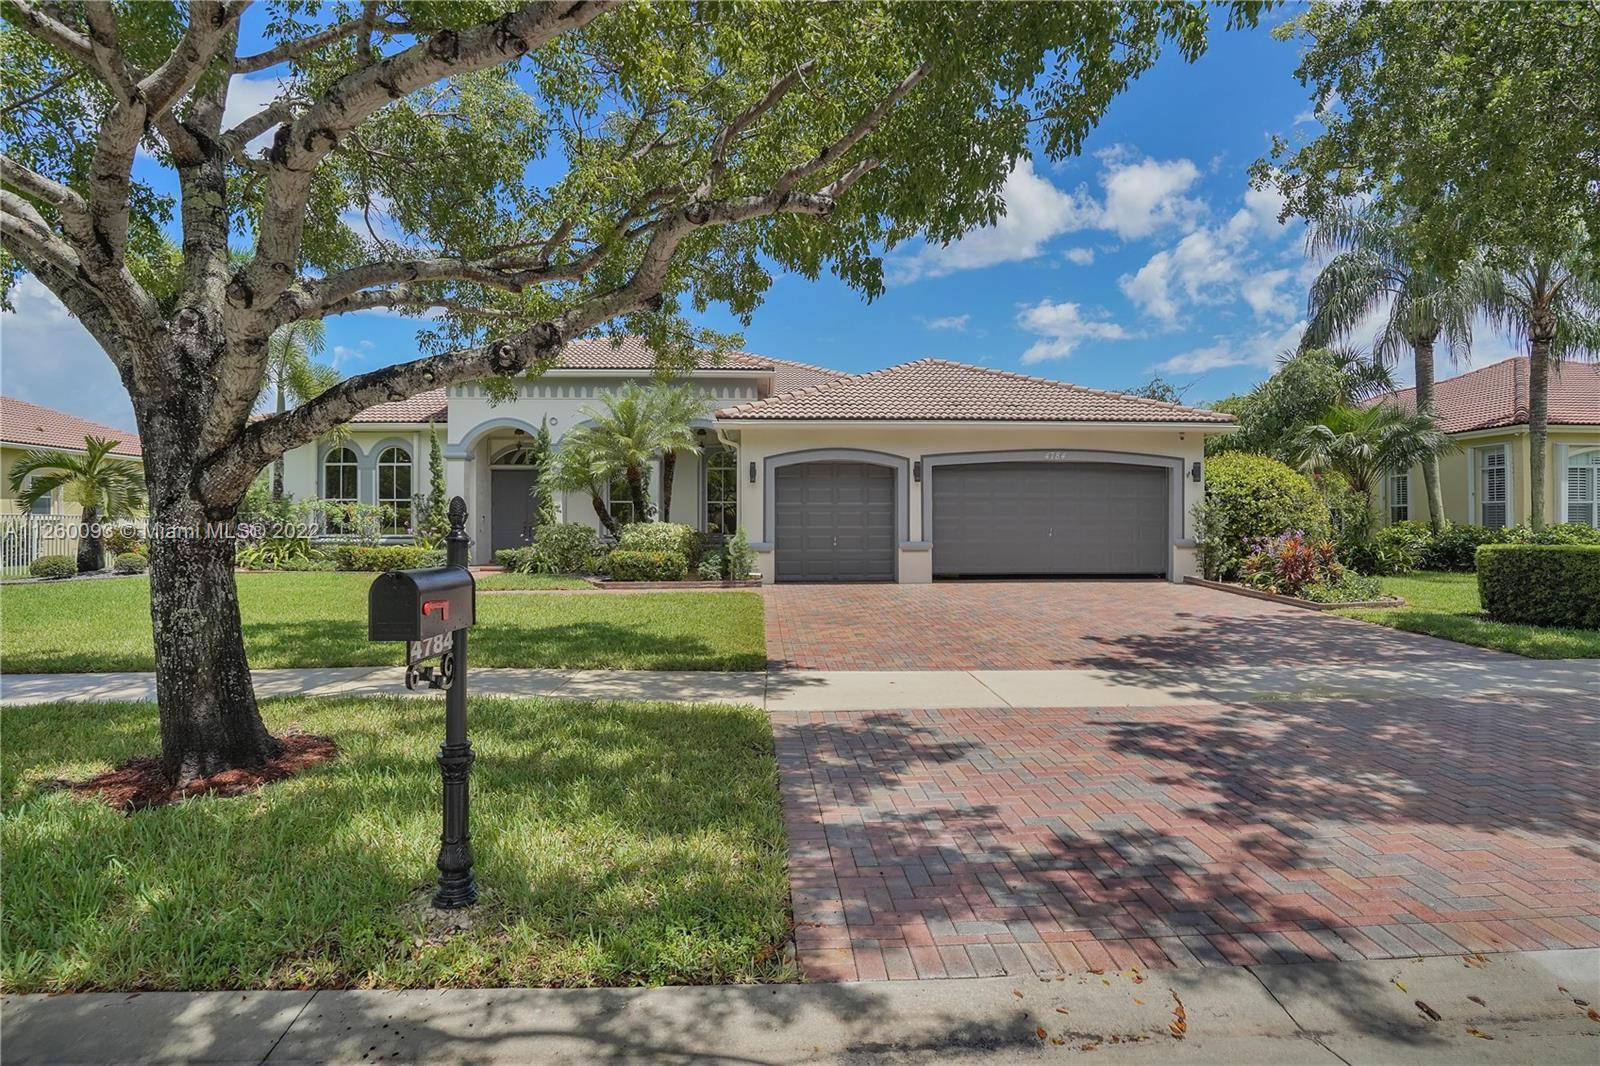 GATE ACCESS NEEDED FOR HOUSE TOUR THIS SAT CALL LA PLEASE Gorgeous lakefront fountain view home on oversized lot right in the center of the gated community of Hibbs Grove.